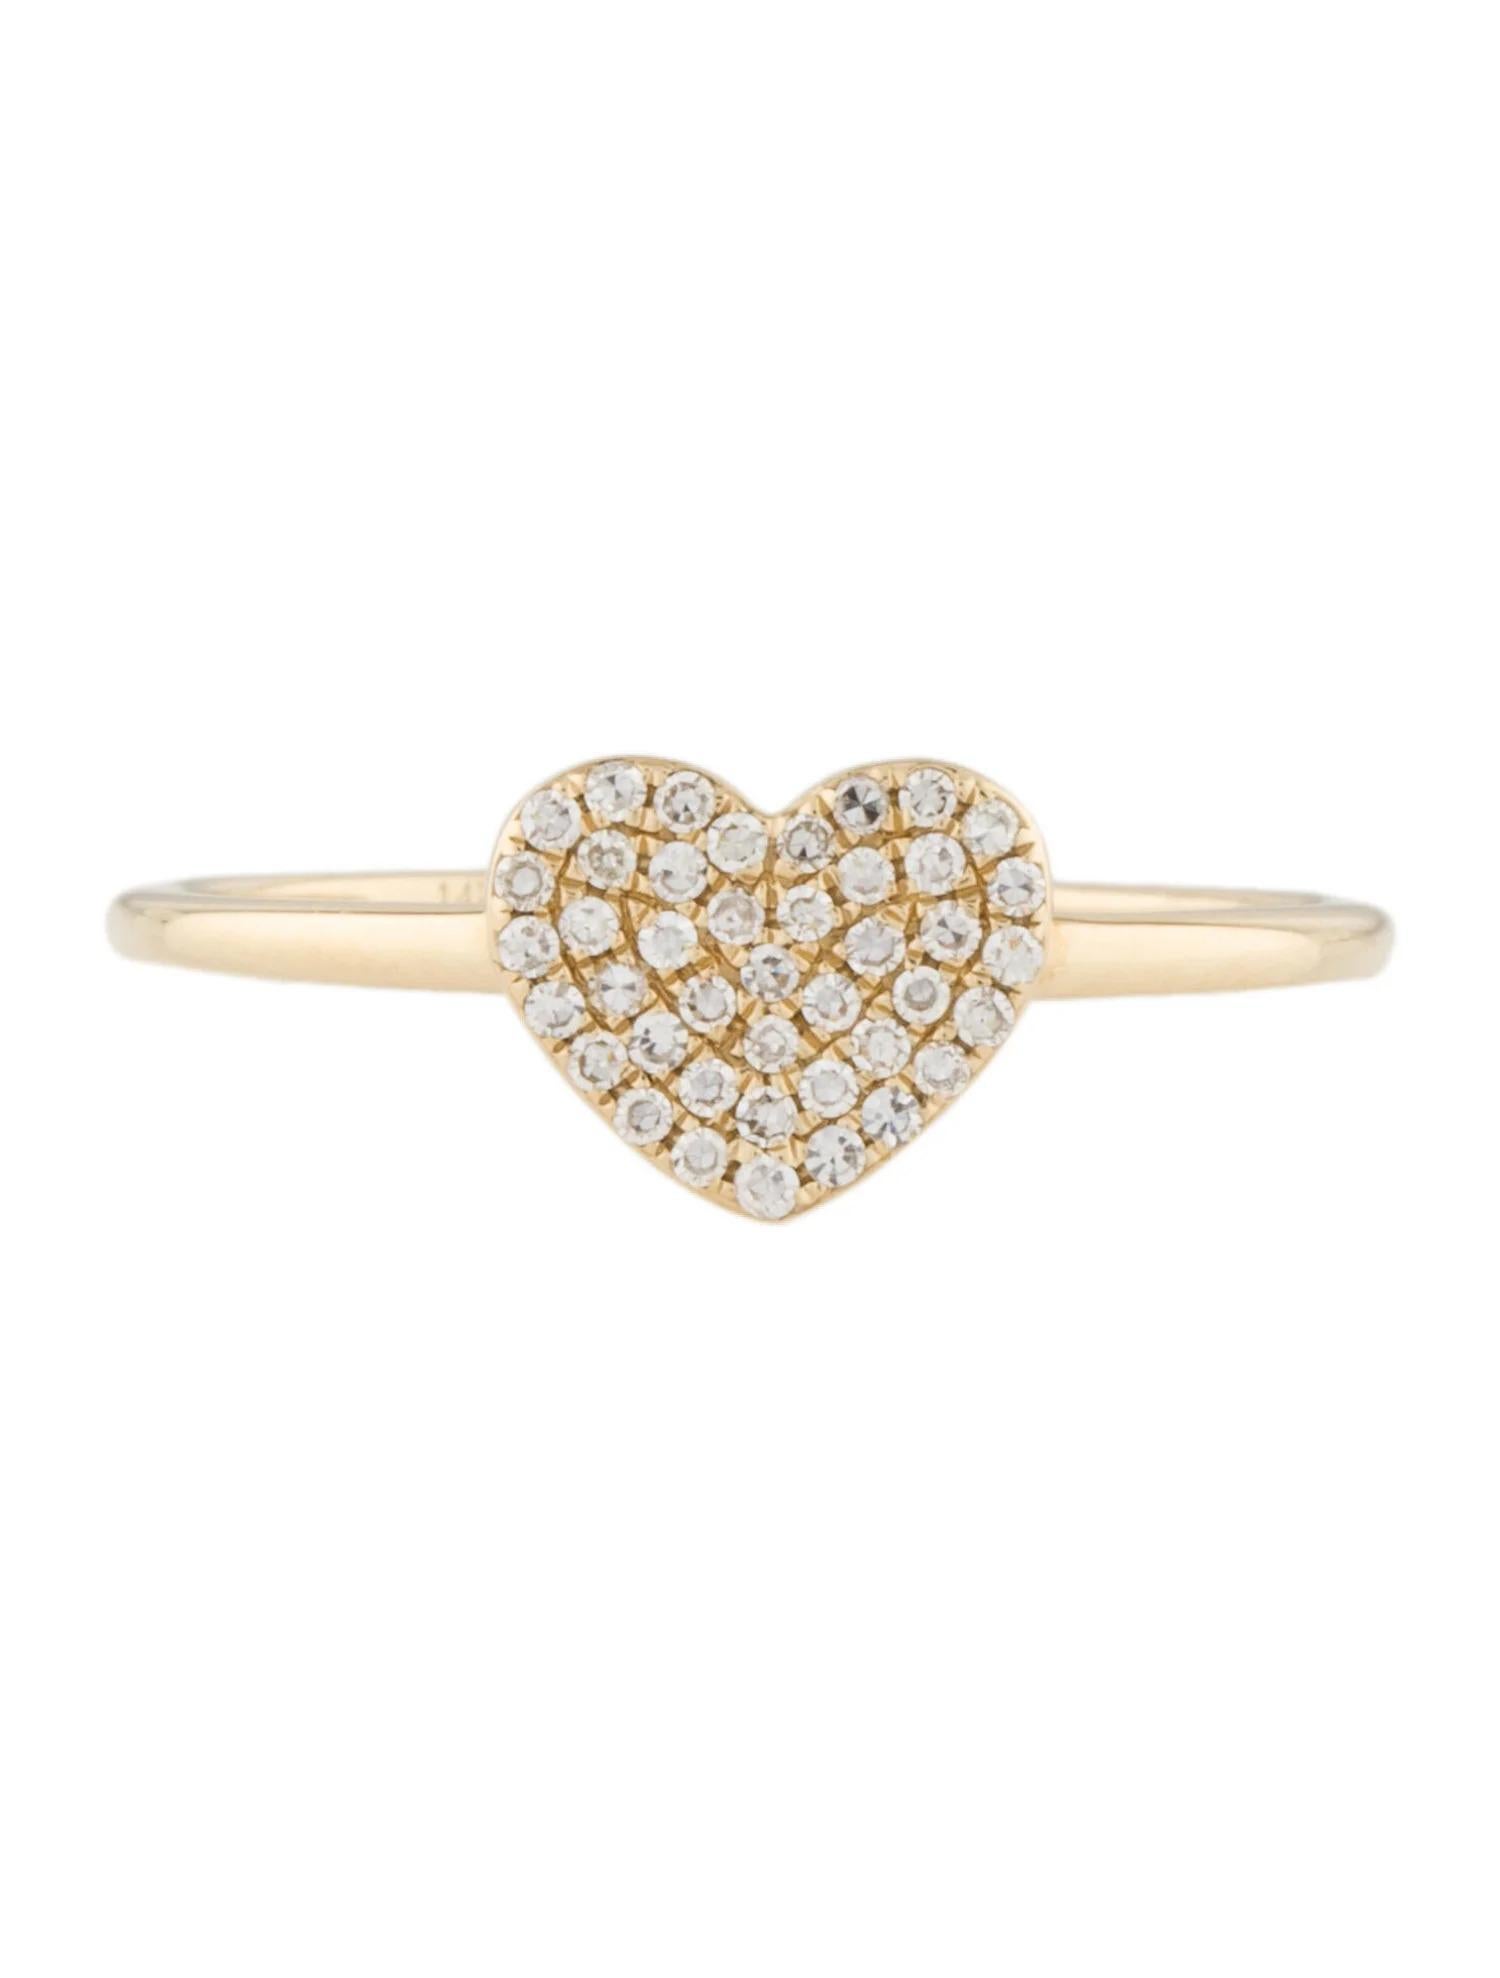 This stunning ring features a beautiful Heart Cluster of White Diamonds,.
This ring is set in 14K Yellow Gold. Total Diamond Weight = 0.13 Carats. Ring Size is 6 1/2.